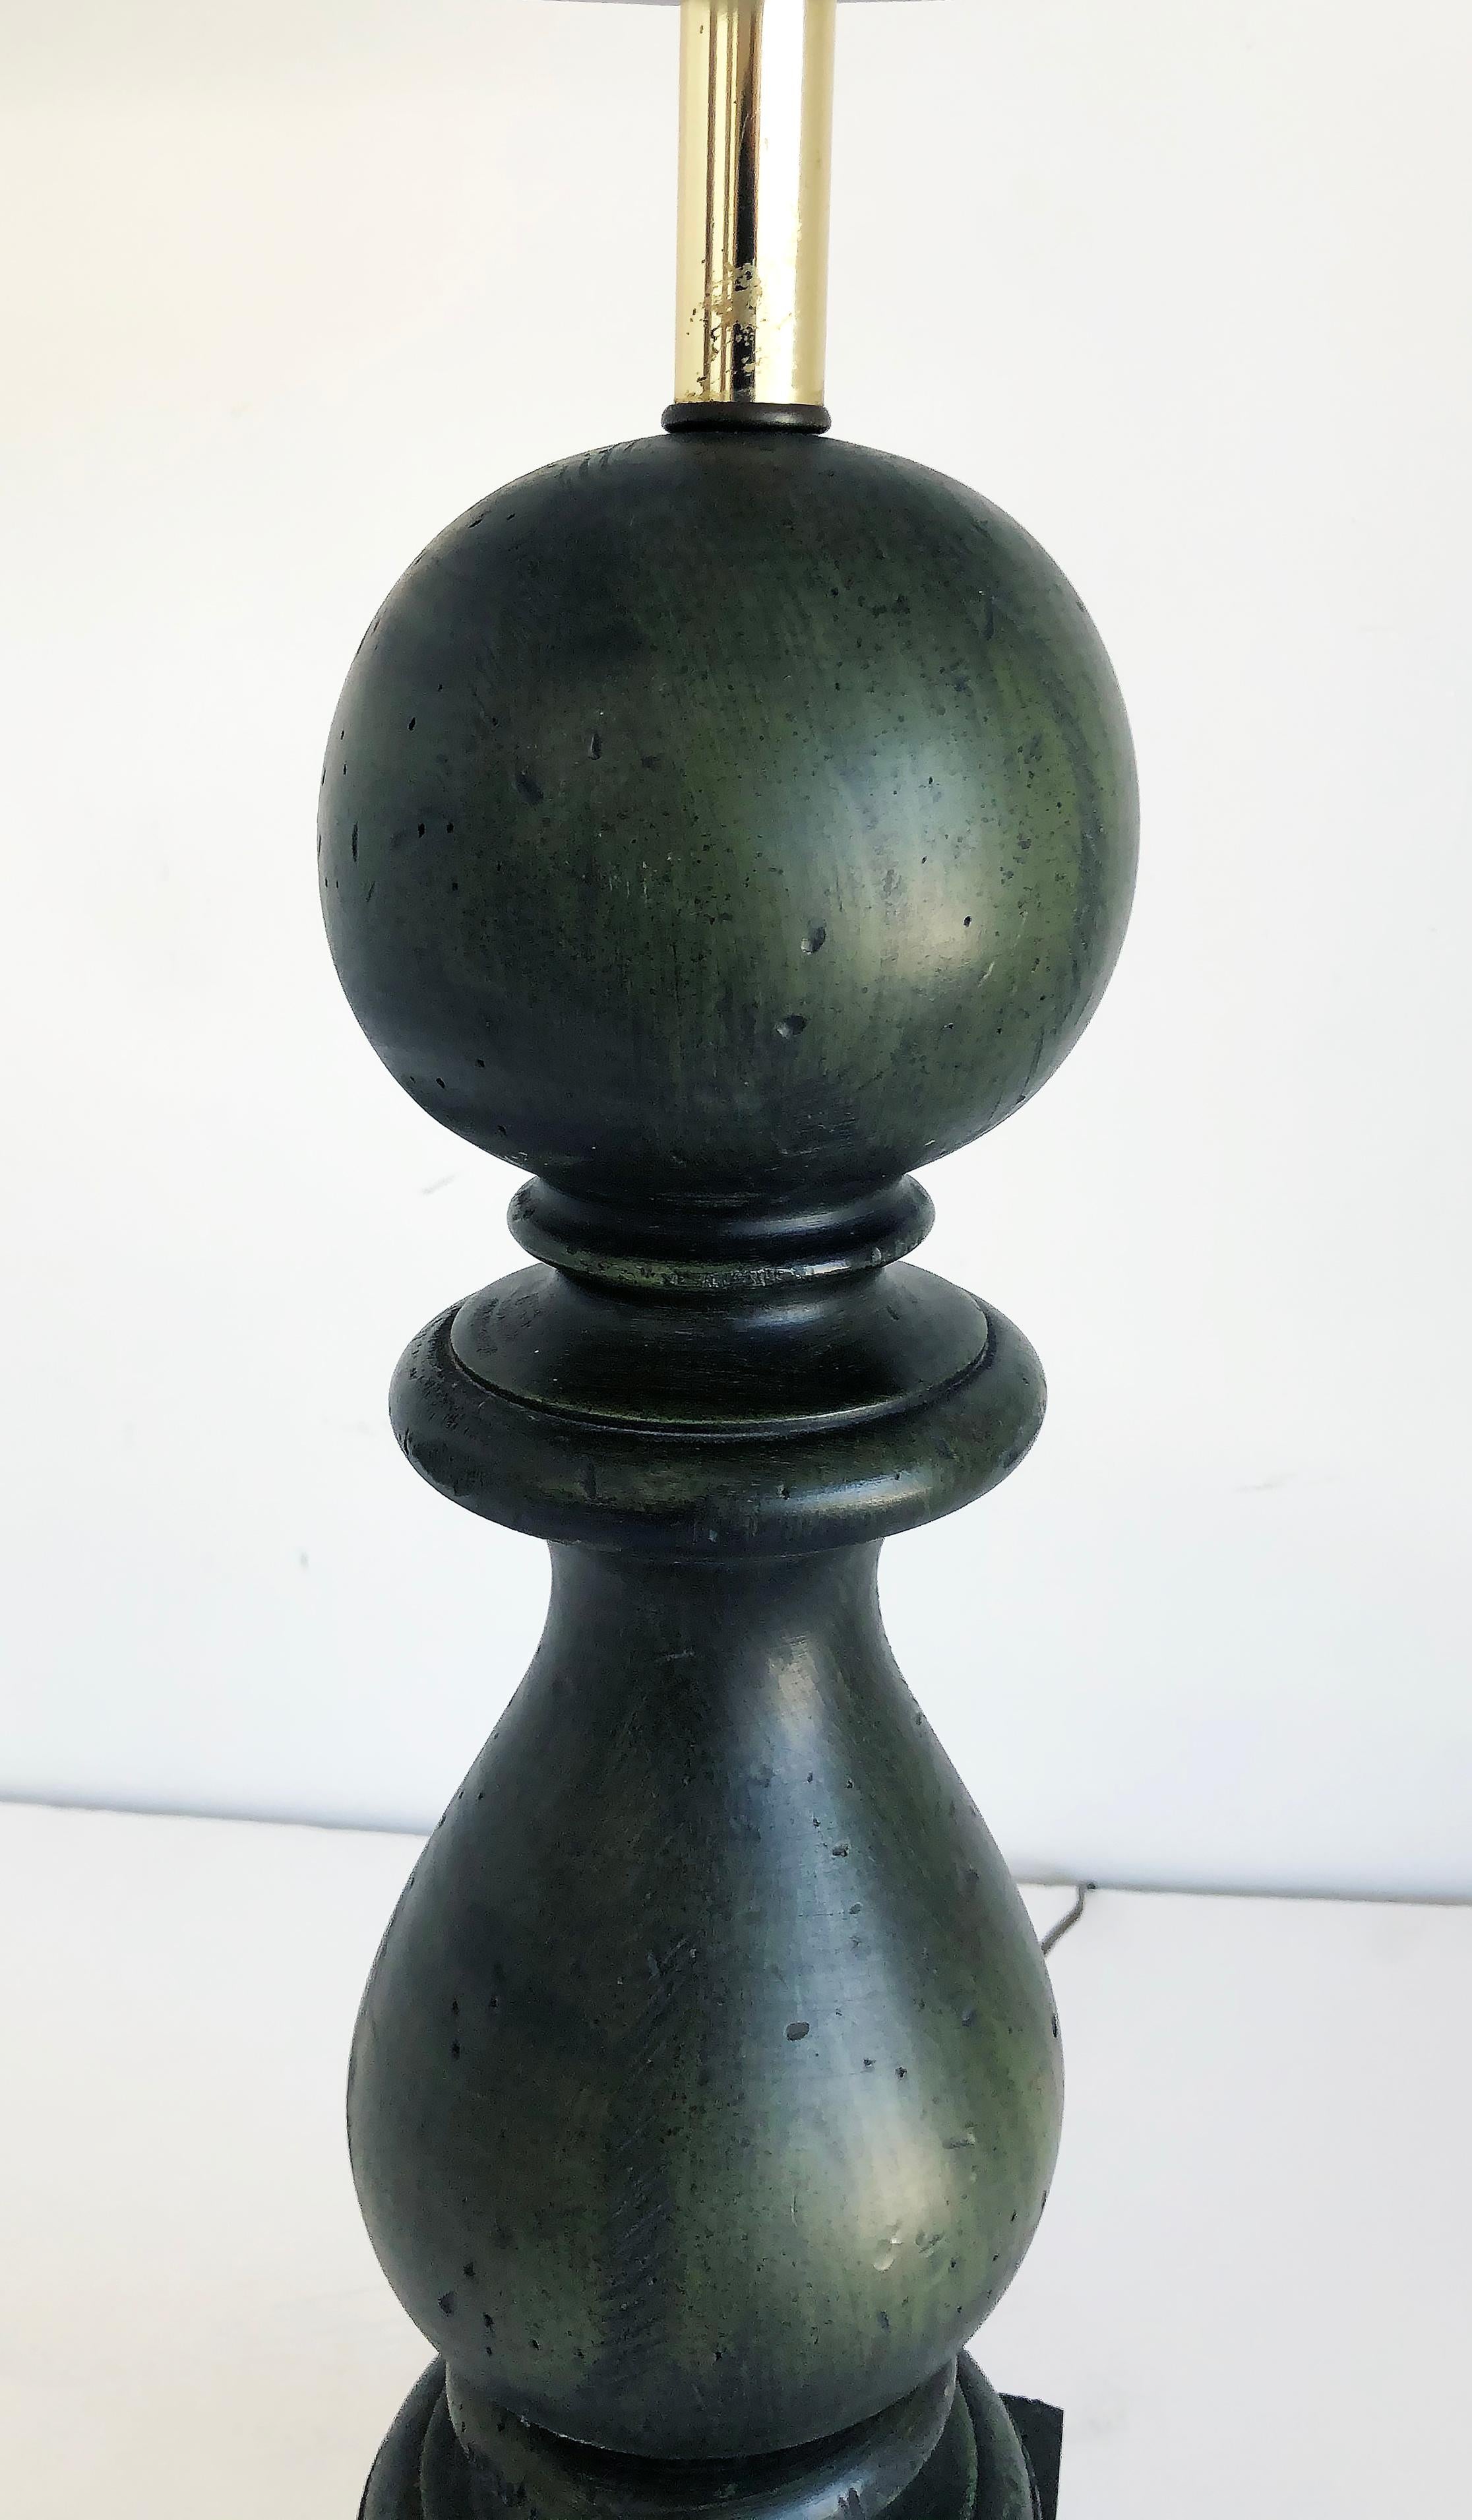 Overscale vintage carved wood Balustrade table lamps

Offered for sale is a pair of overscaled turned carved wood lamps on a giltwood base. The lamps are created in a balustrade form with the wood having been stained in dark green. The lamps are